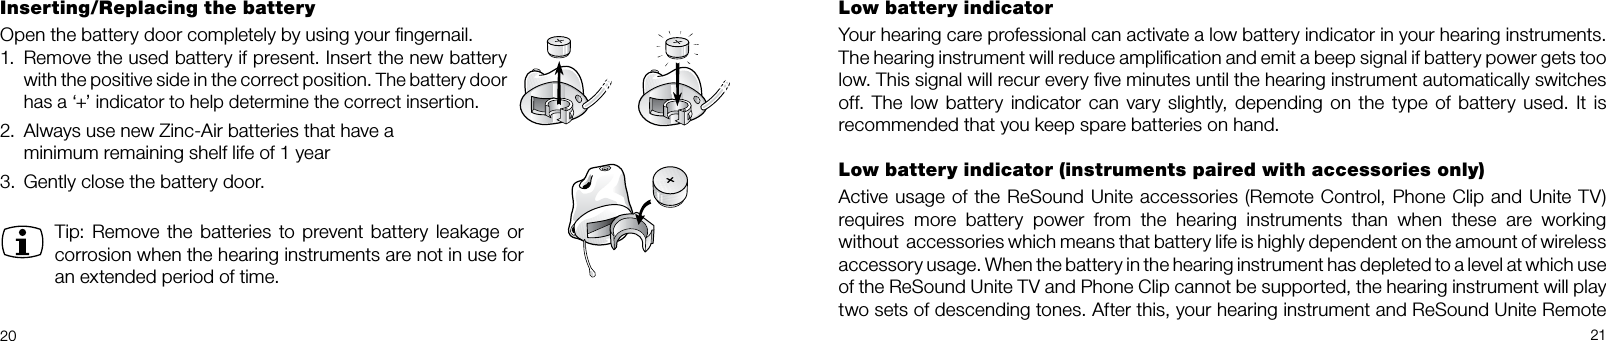 20 21Low battery indicatorYour hearing care professional can activate a low battery indicator in your hearing instruments.  The hearing instrument will reduce ampliﬁcation and emit a beep signal if battery power gets too low. This signal will recur every ﬁve minutes until the hearing instrument automatically switches off. The low battery indicator can vary slightly, depending on the type of battery used. It is  recommended that you keep spare batteries on hand. Low battery indicator (instruments paired with accessories only)Active usage of the ReSound Unite accessories (Remote Control, Phone Clip and Unite TV)requires more battery power from the hearing instruments than when these are working  without  accessories which means that battery life is highly dependent on the amount of wireless accessory usage. When the battery in the hearing instrument has depleted to a level at which use  of the ReSound Unite TV and Phone Clip cannot be supported, the hearing instrument will play  two sets of descending tones. After this, your hearing instrument and ReSound Unite Remote Inserting/Replacing the batteryOpen the battery door completely by using your ﬁngernail. 1.  Remove the used battery if present. Insert the new battery with the positive side in the correct position. The battery door has a ‘+’ indicator to help determine the correct insertion.2.  Always use new Zinc-Air batteries that have a  minimum remaining shelf life of 1 year3.  Gently close the battery door.Tip: Remove the batteries to prevent battery leakage or corrosion when the hearing instruments are not in use for an extended period of time.